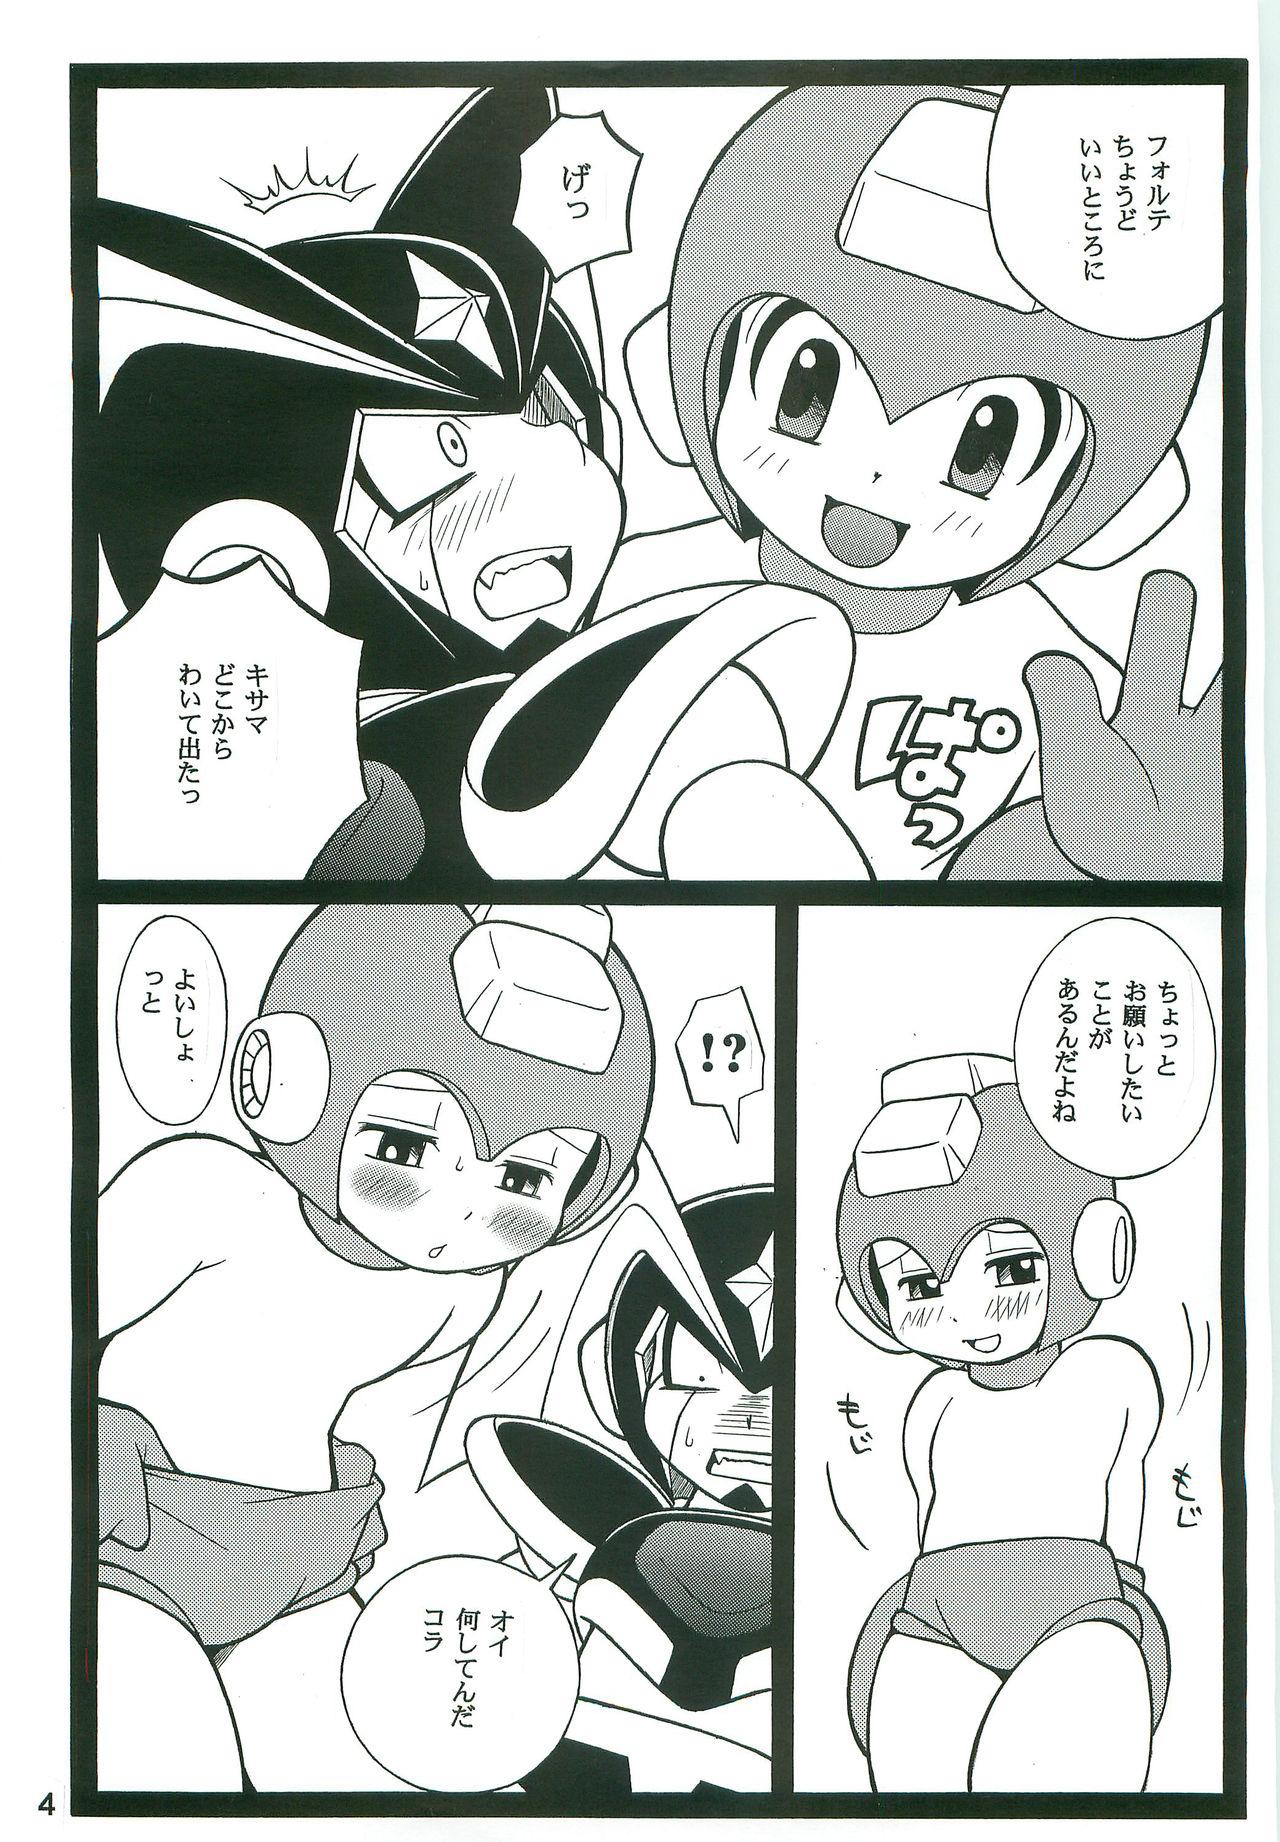 Special Locations DREAM OF BASS - Megaman Gay College - Page 3